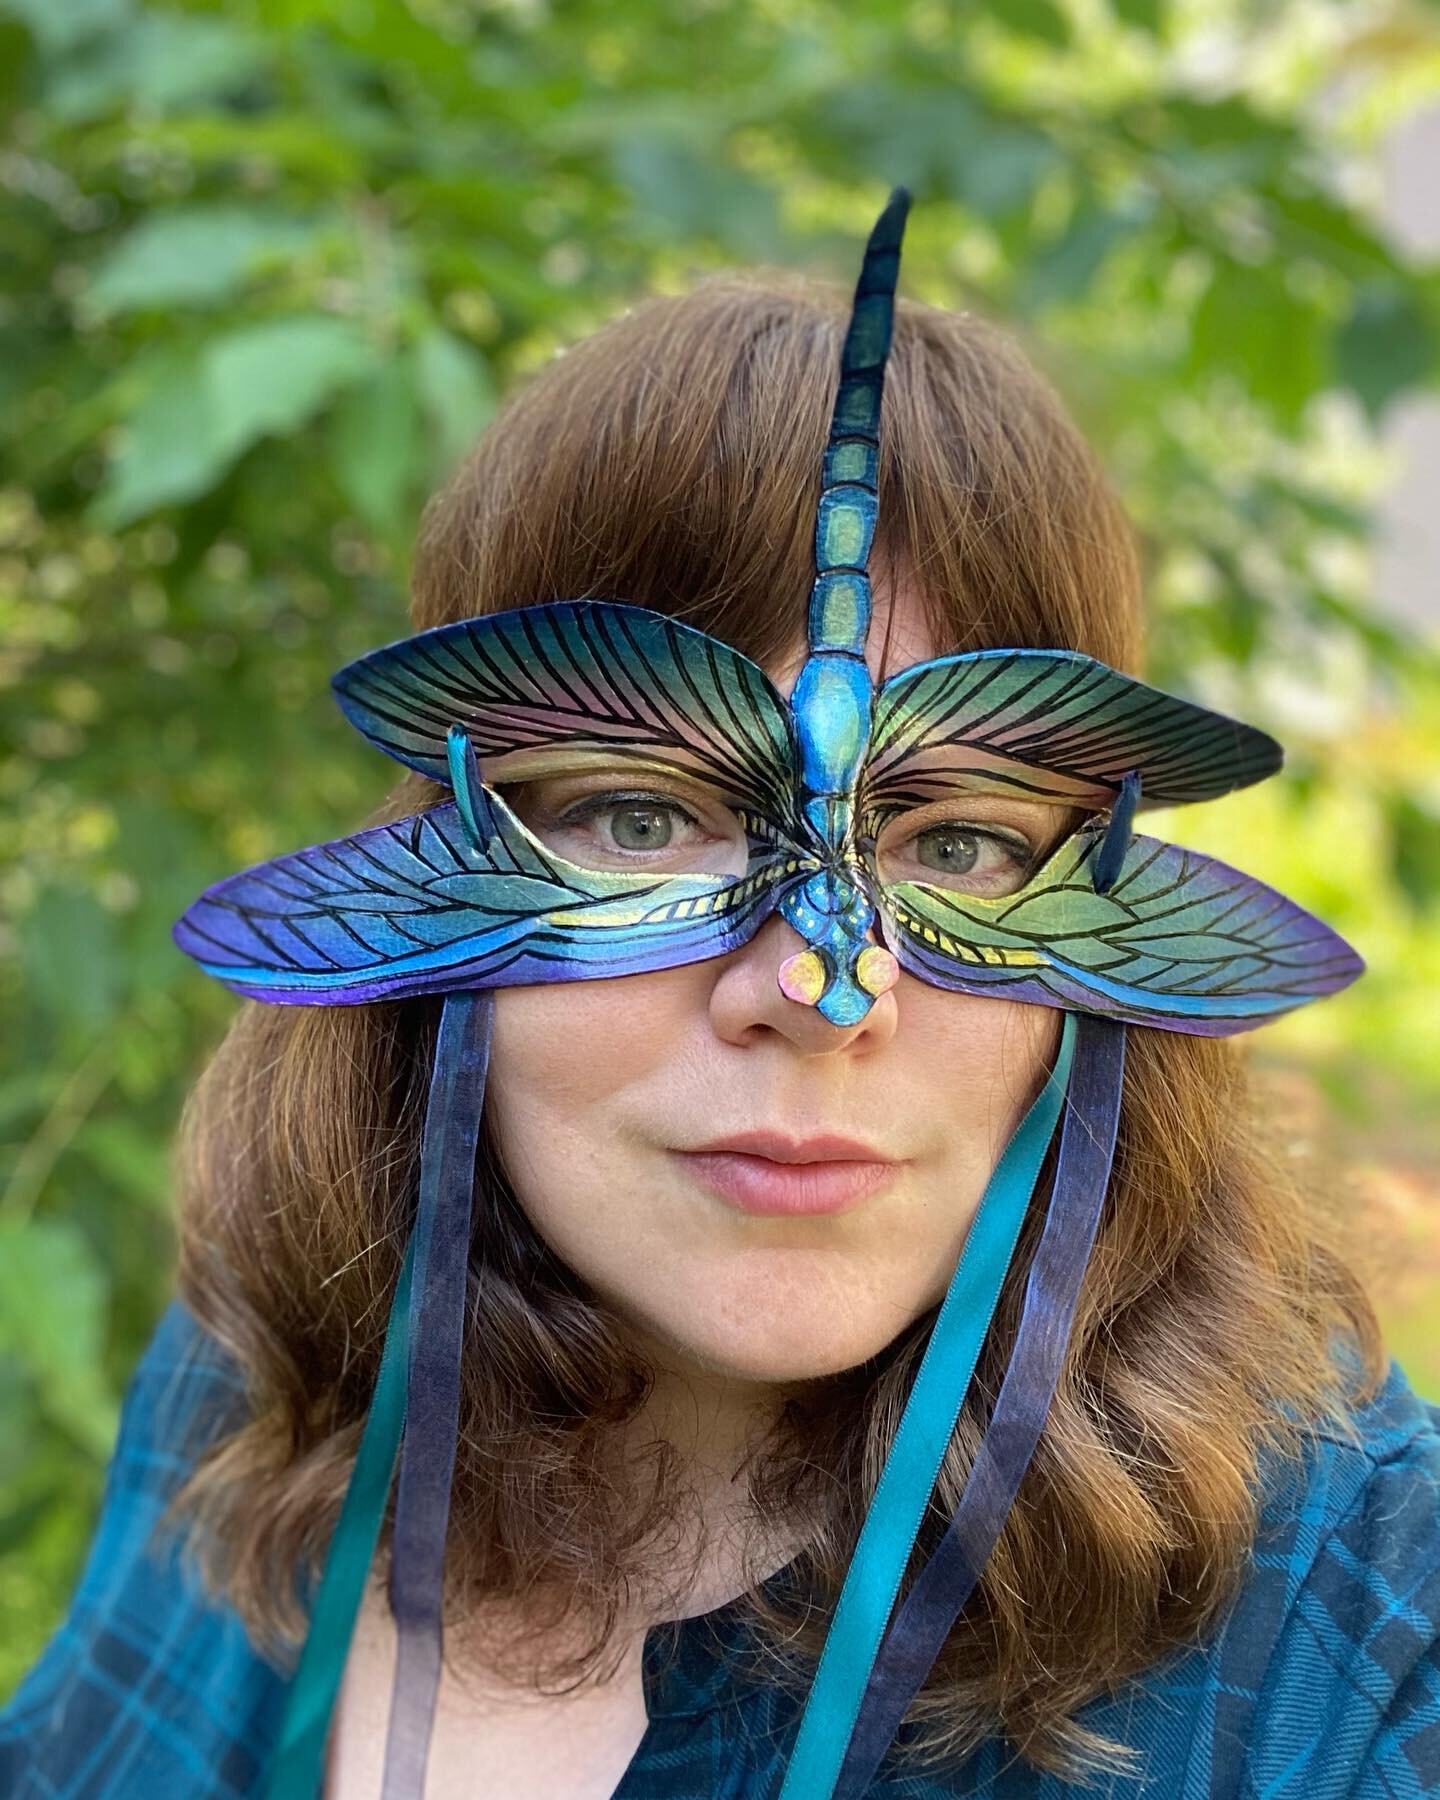 The latest addition to my leather mask design collection: a dragonfly! This mask will be available to purchase in my Etsy shop @ faylander or message me directly if interested.

#etsy #leathermask #art #artist #costume #mask #dragonfly